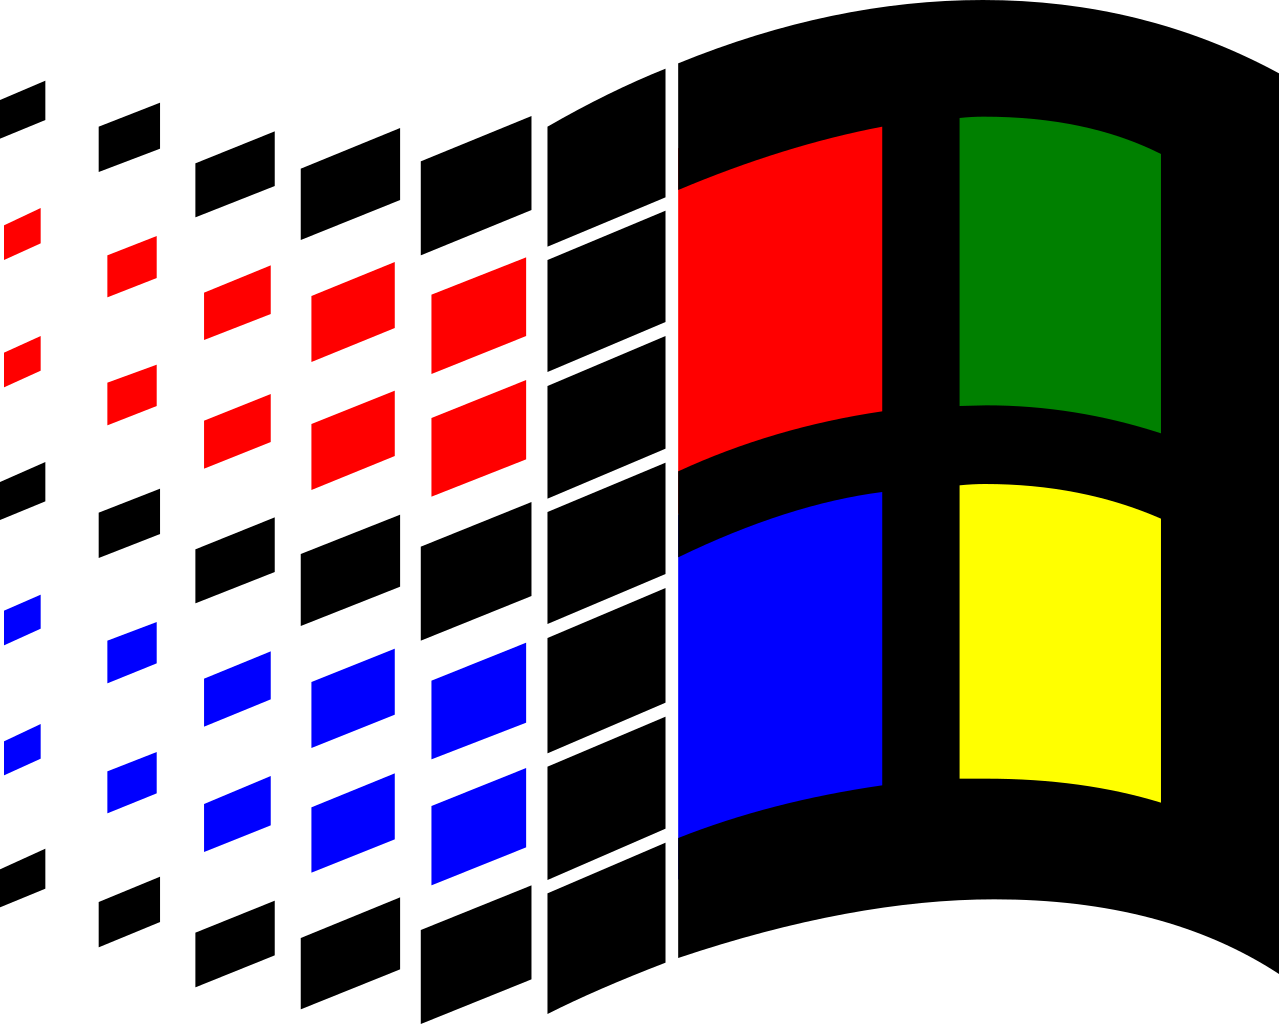 Windows logo with version number